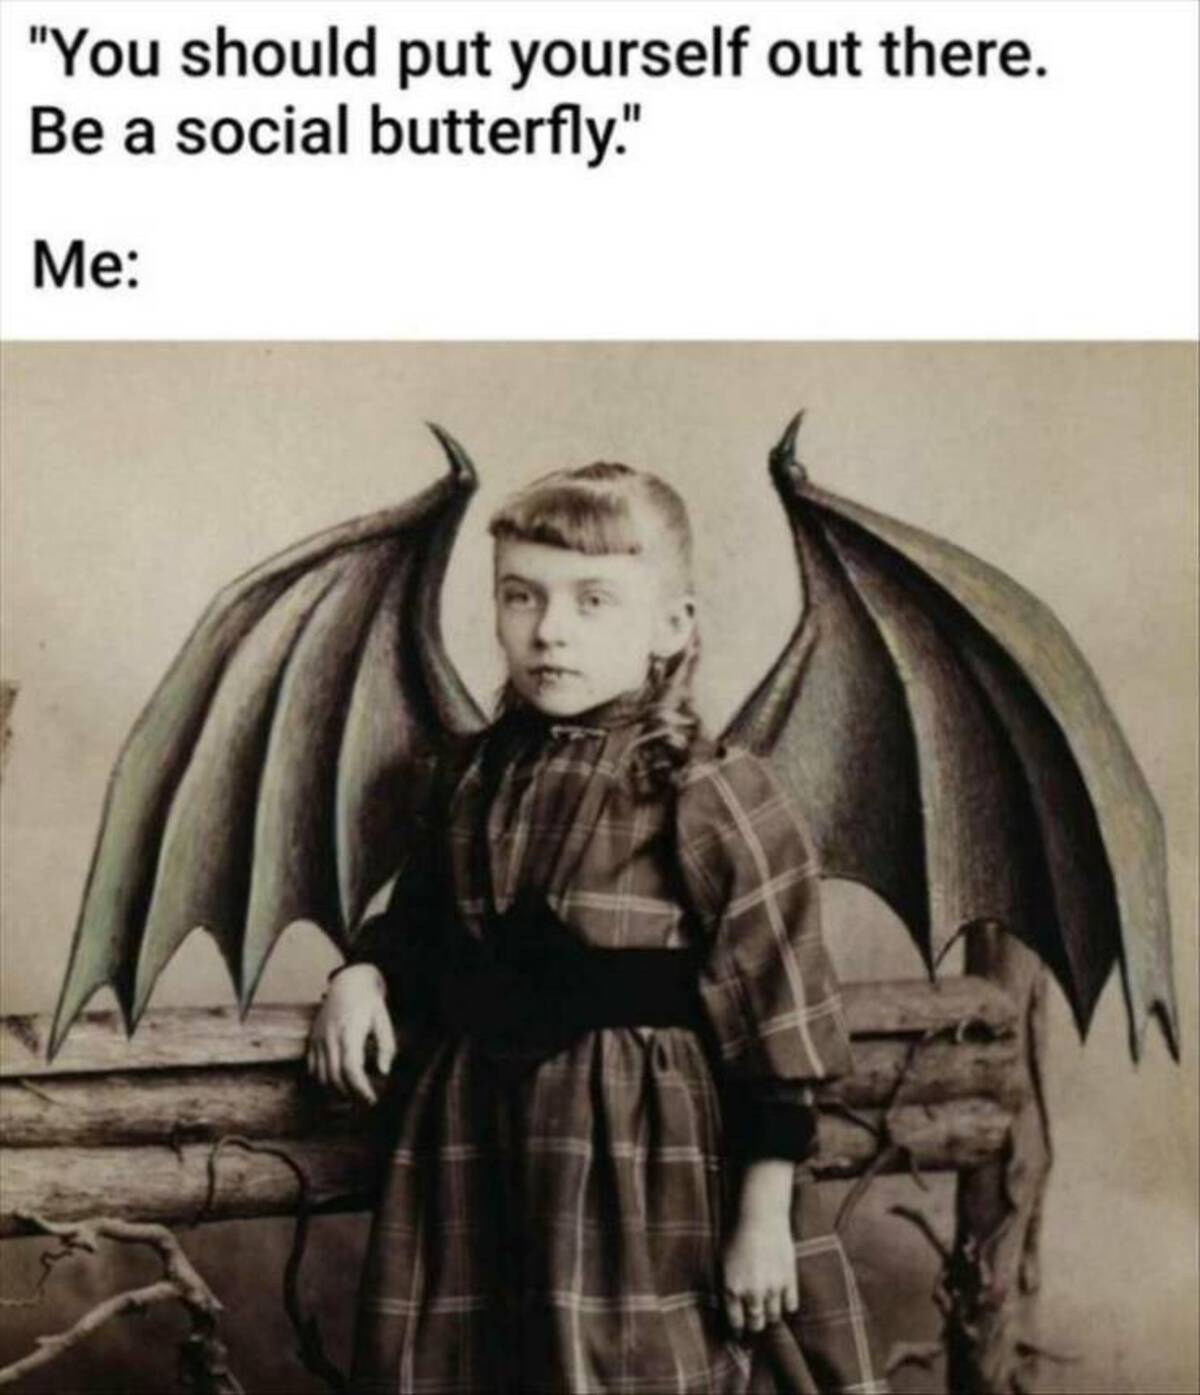 supernatural creature - "You should put yourself out there. Be a social butterfly." Me